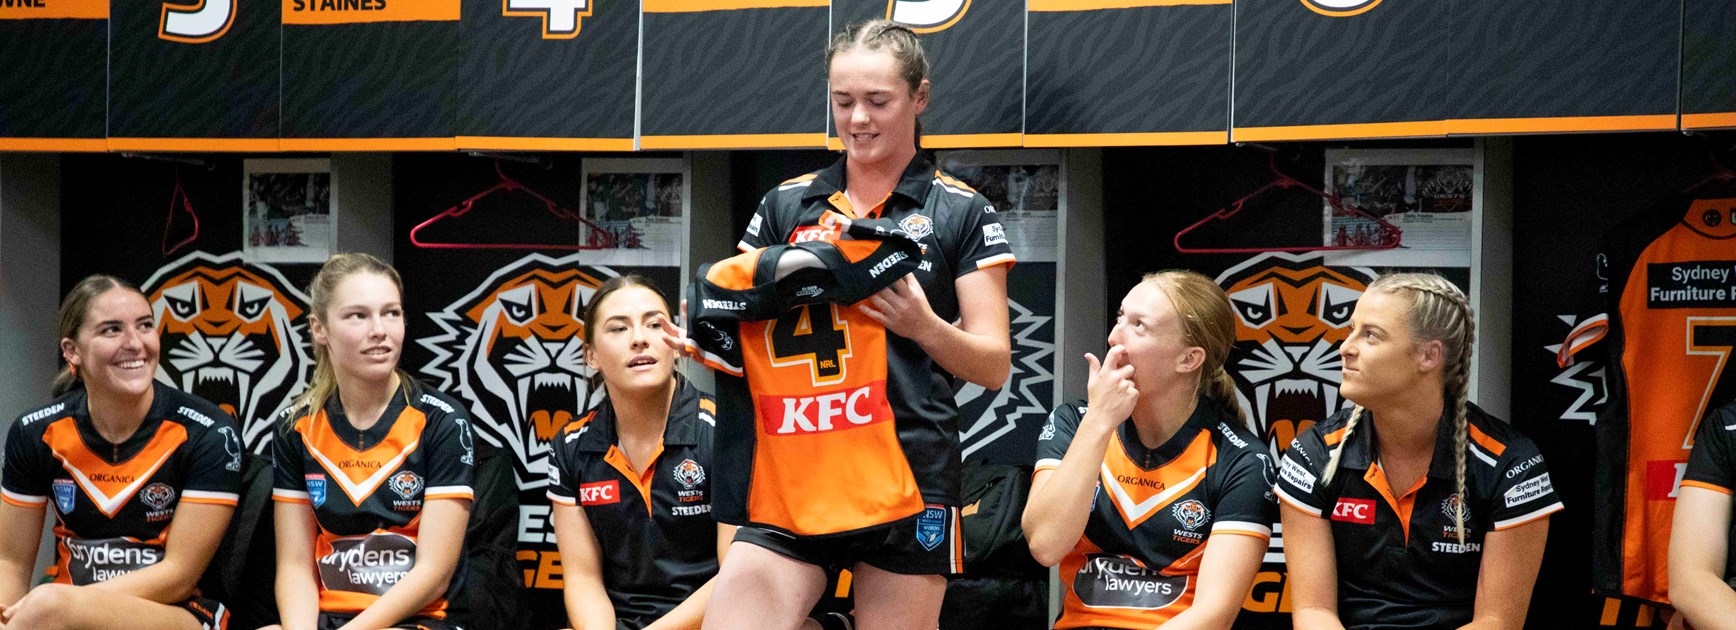 Tess Staines presented with her Wests Tigers HNW jersey 